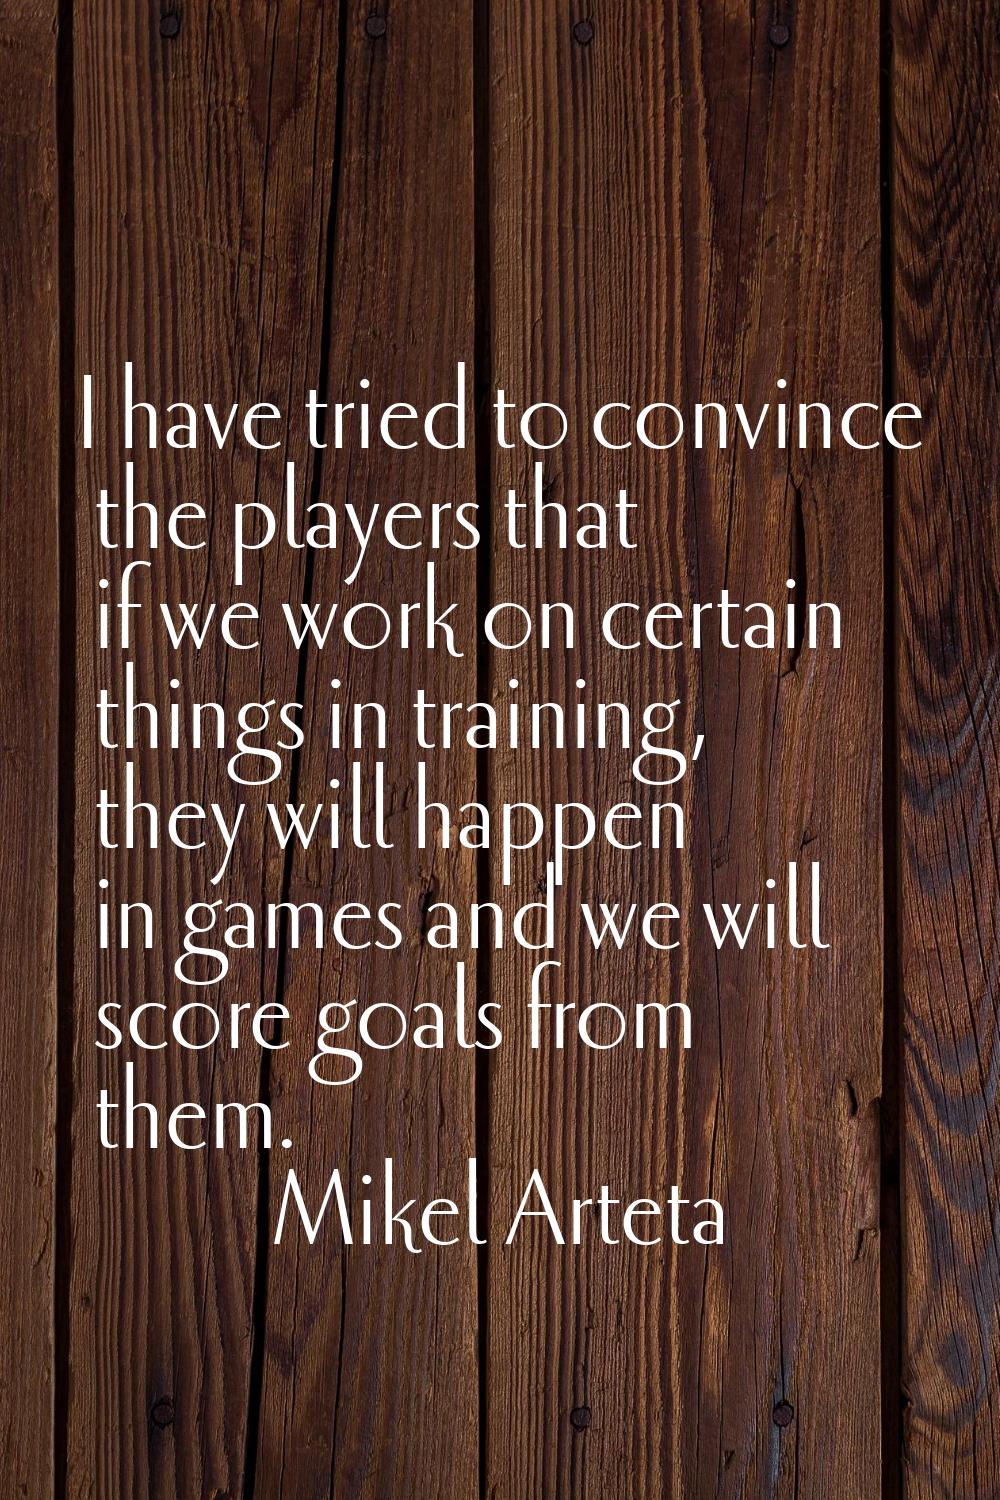 I have tried to convince the players that if we work on certain things in training, they will happe